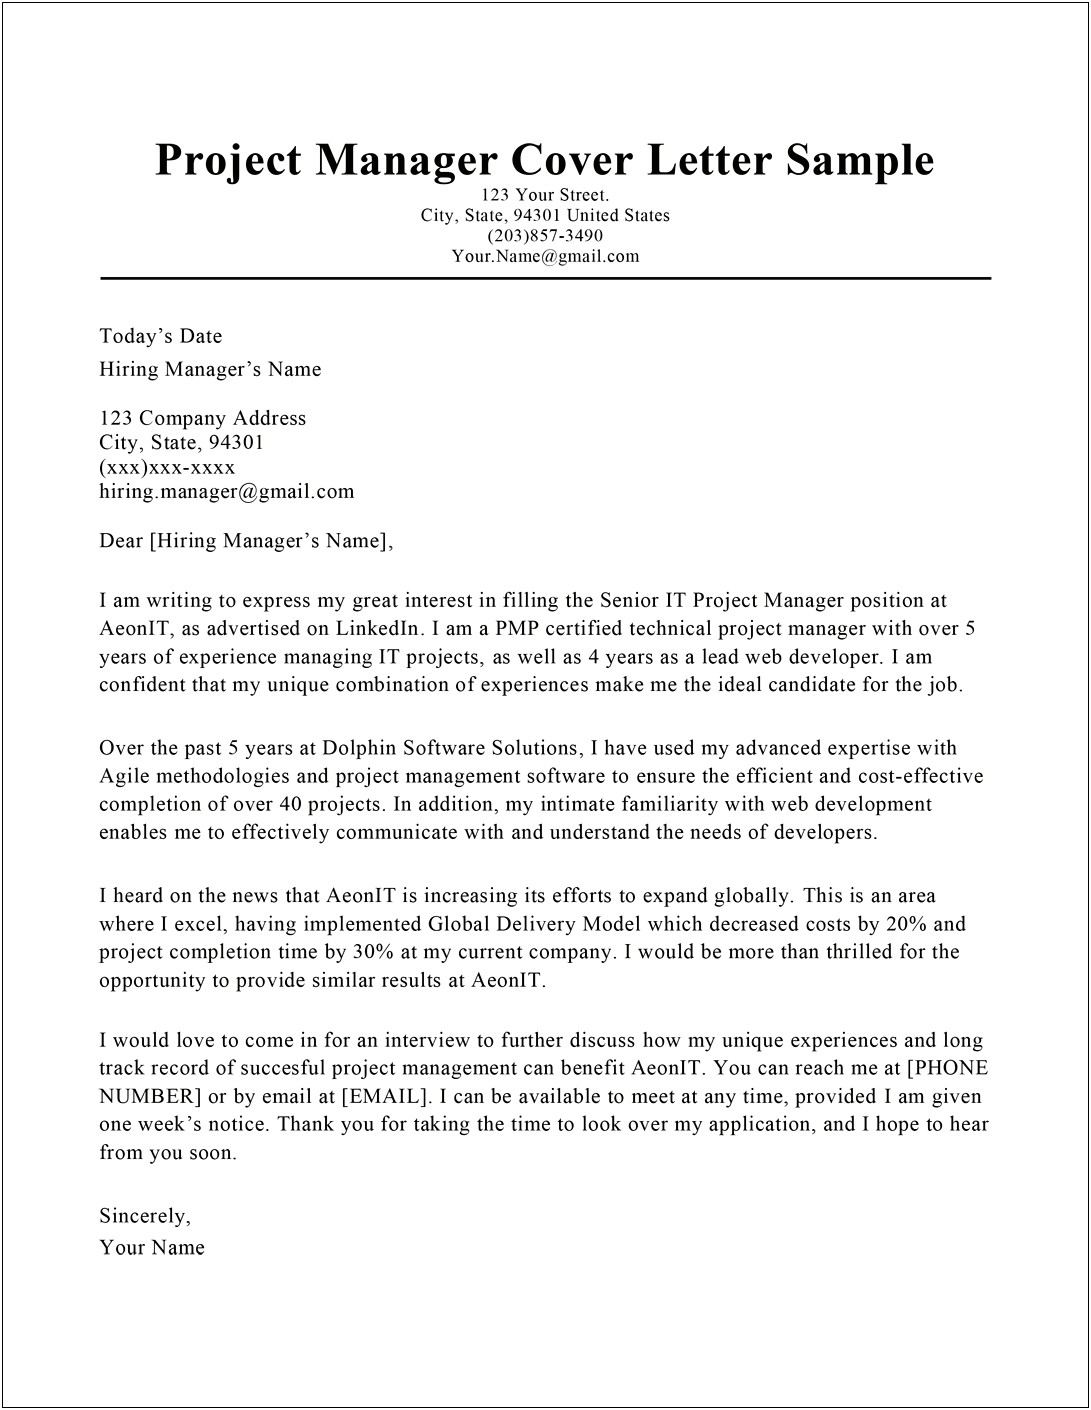 Resume Cover Letter Format Effective Technical Example